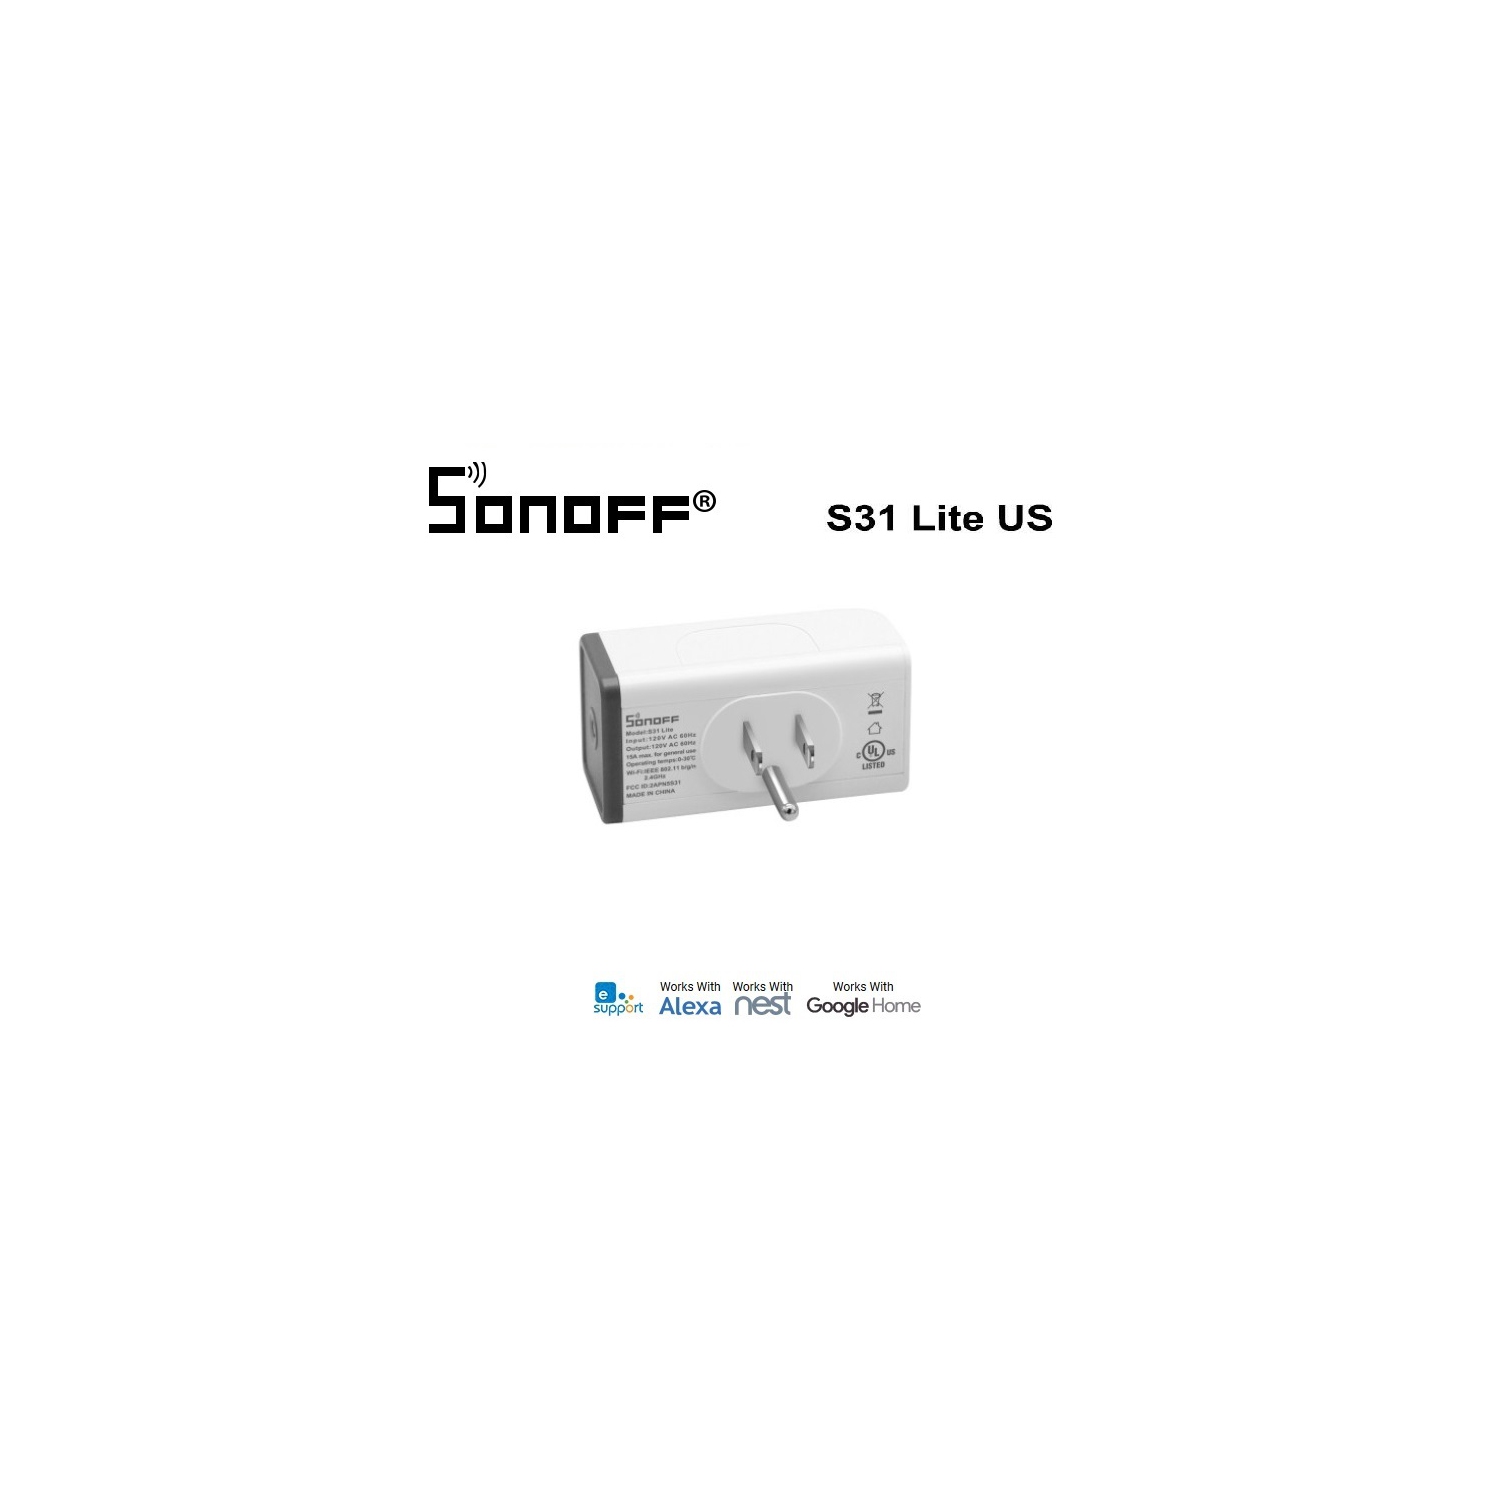 Sonoff S31 Lite - Smart WiFi Socket Remote Control Switch Outlet WIFI Smart Switch Works With Alexa Google Home Assistant